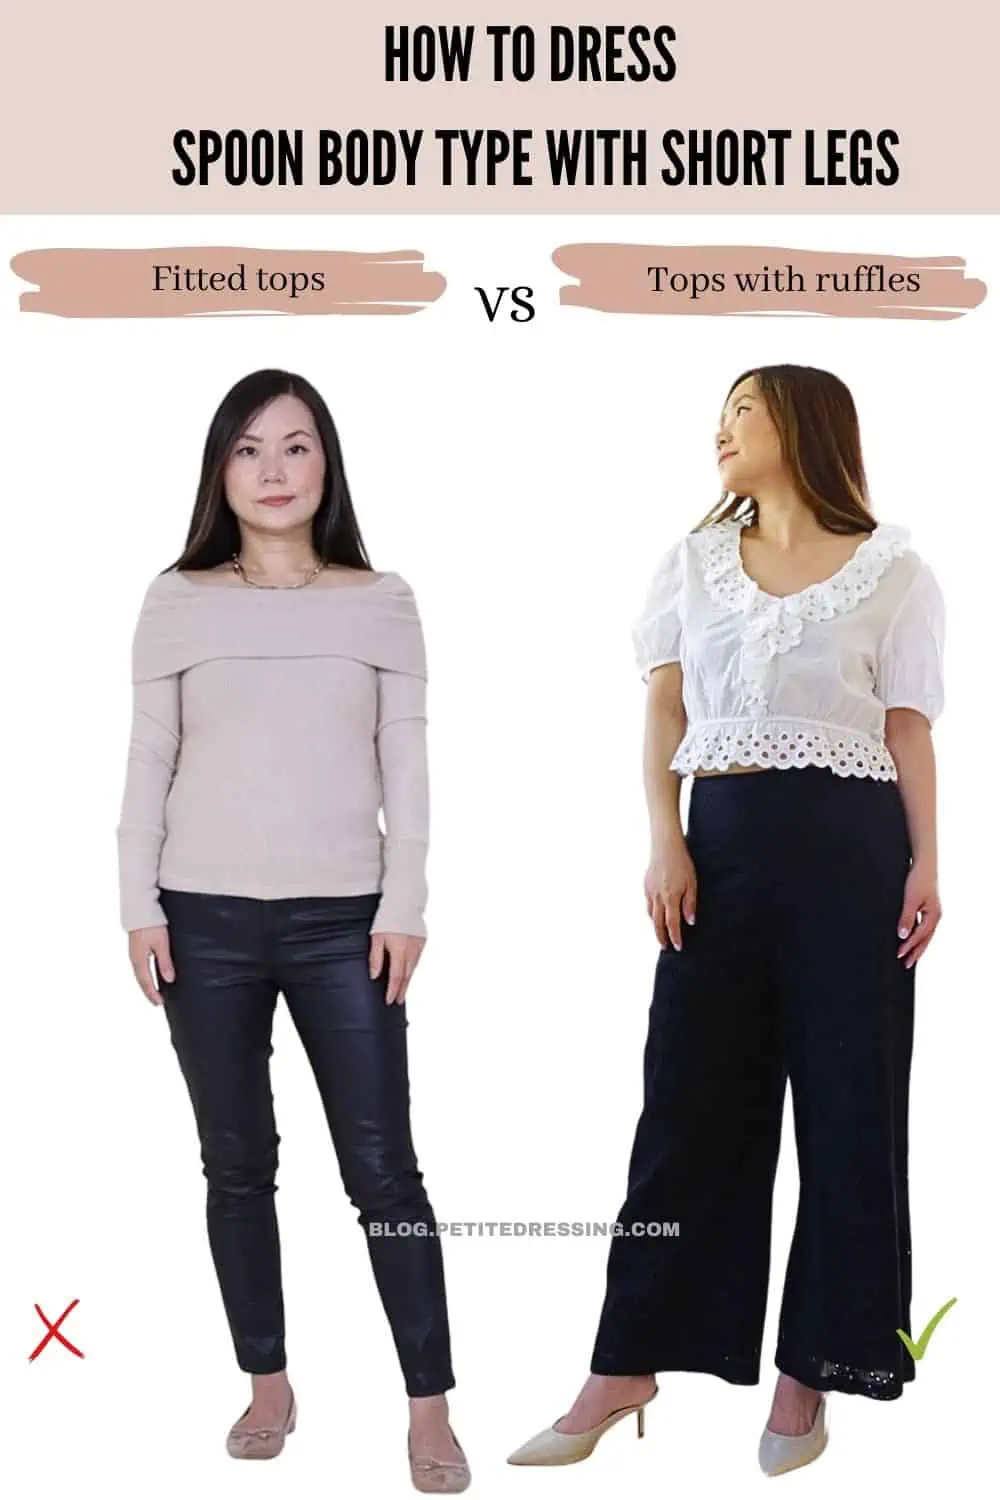 How to Dress Spoon Body Type with Short legs - Petite Dressing